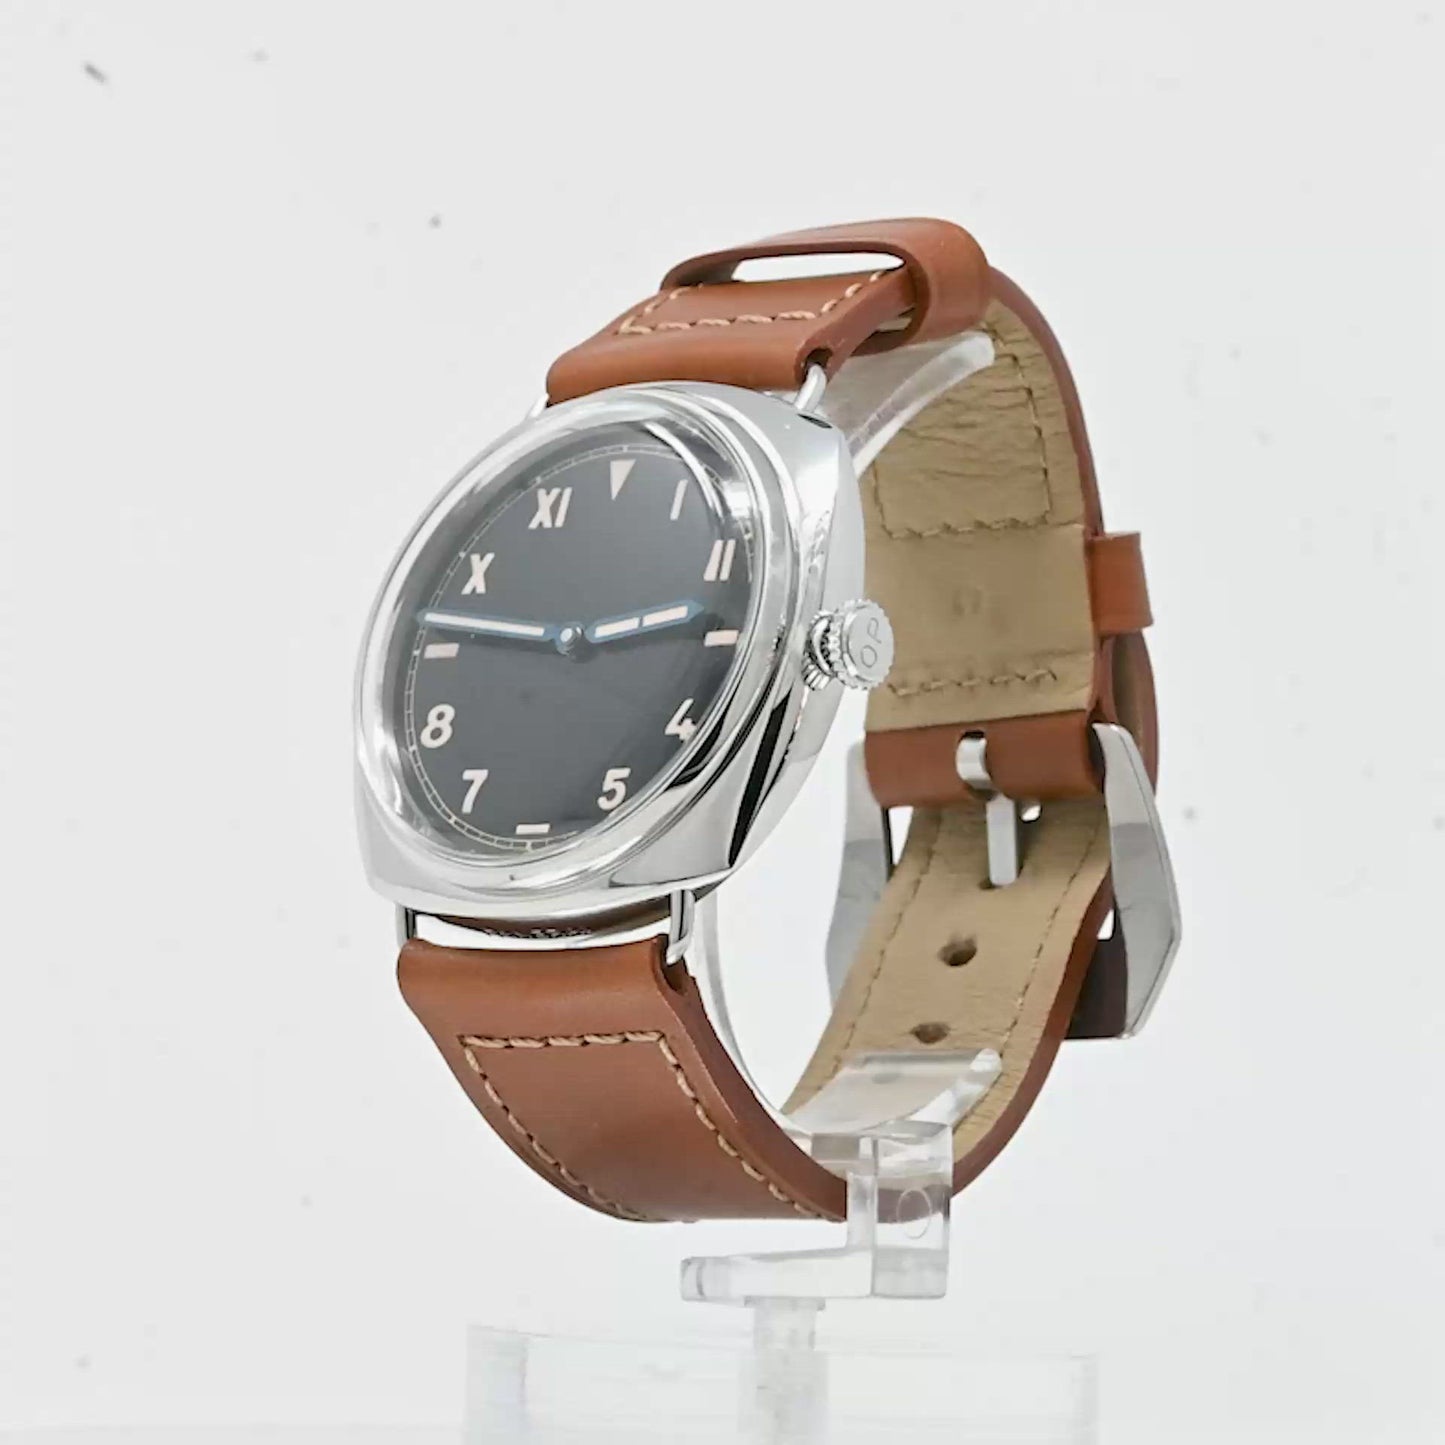 Limited Edition: Panerai Men's Radiomir 1936 Stainless Steel 47mm Black California Dial Watch Reference #: PAM00249